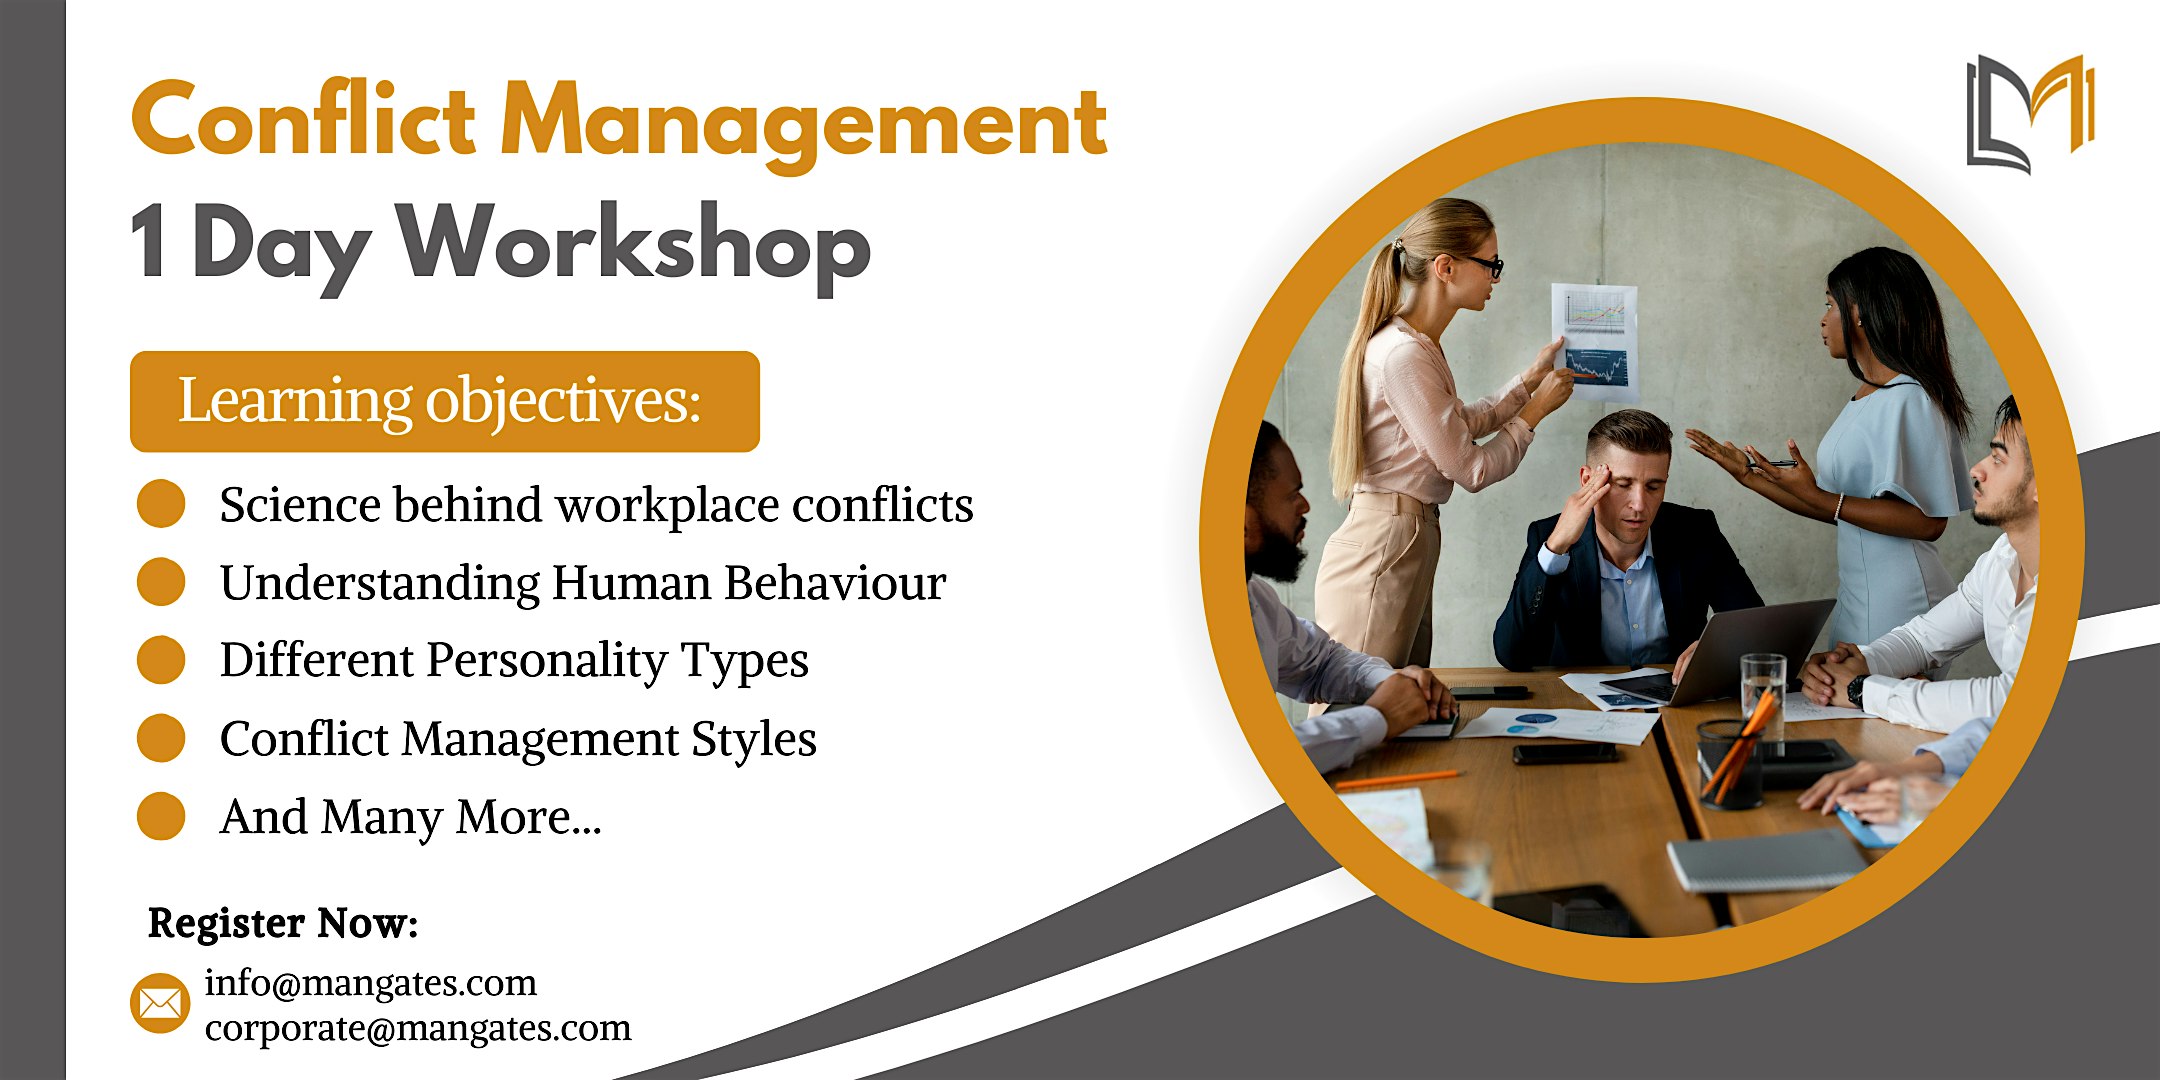 Strategic Conflict Management 1 Day Workshop in Green Bay, WI